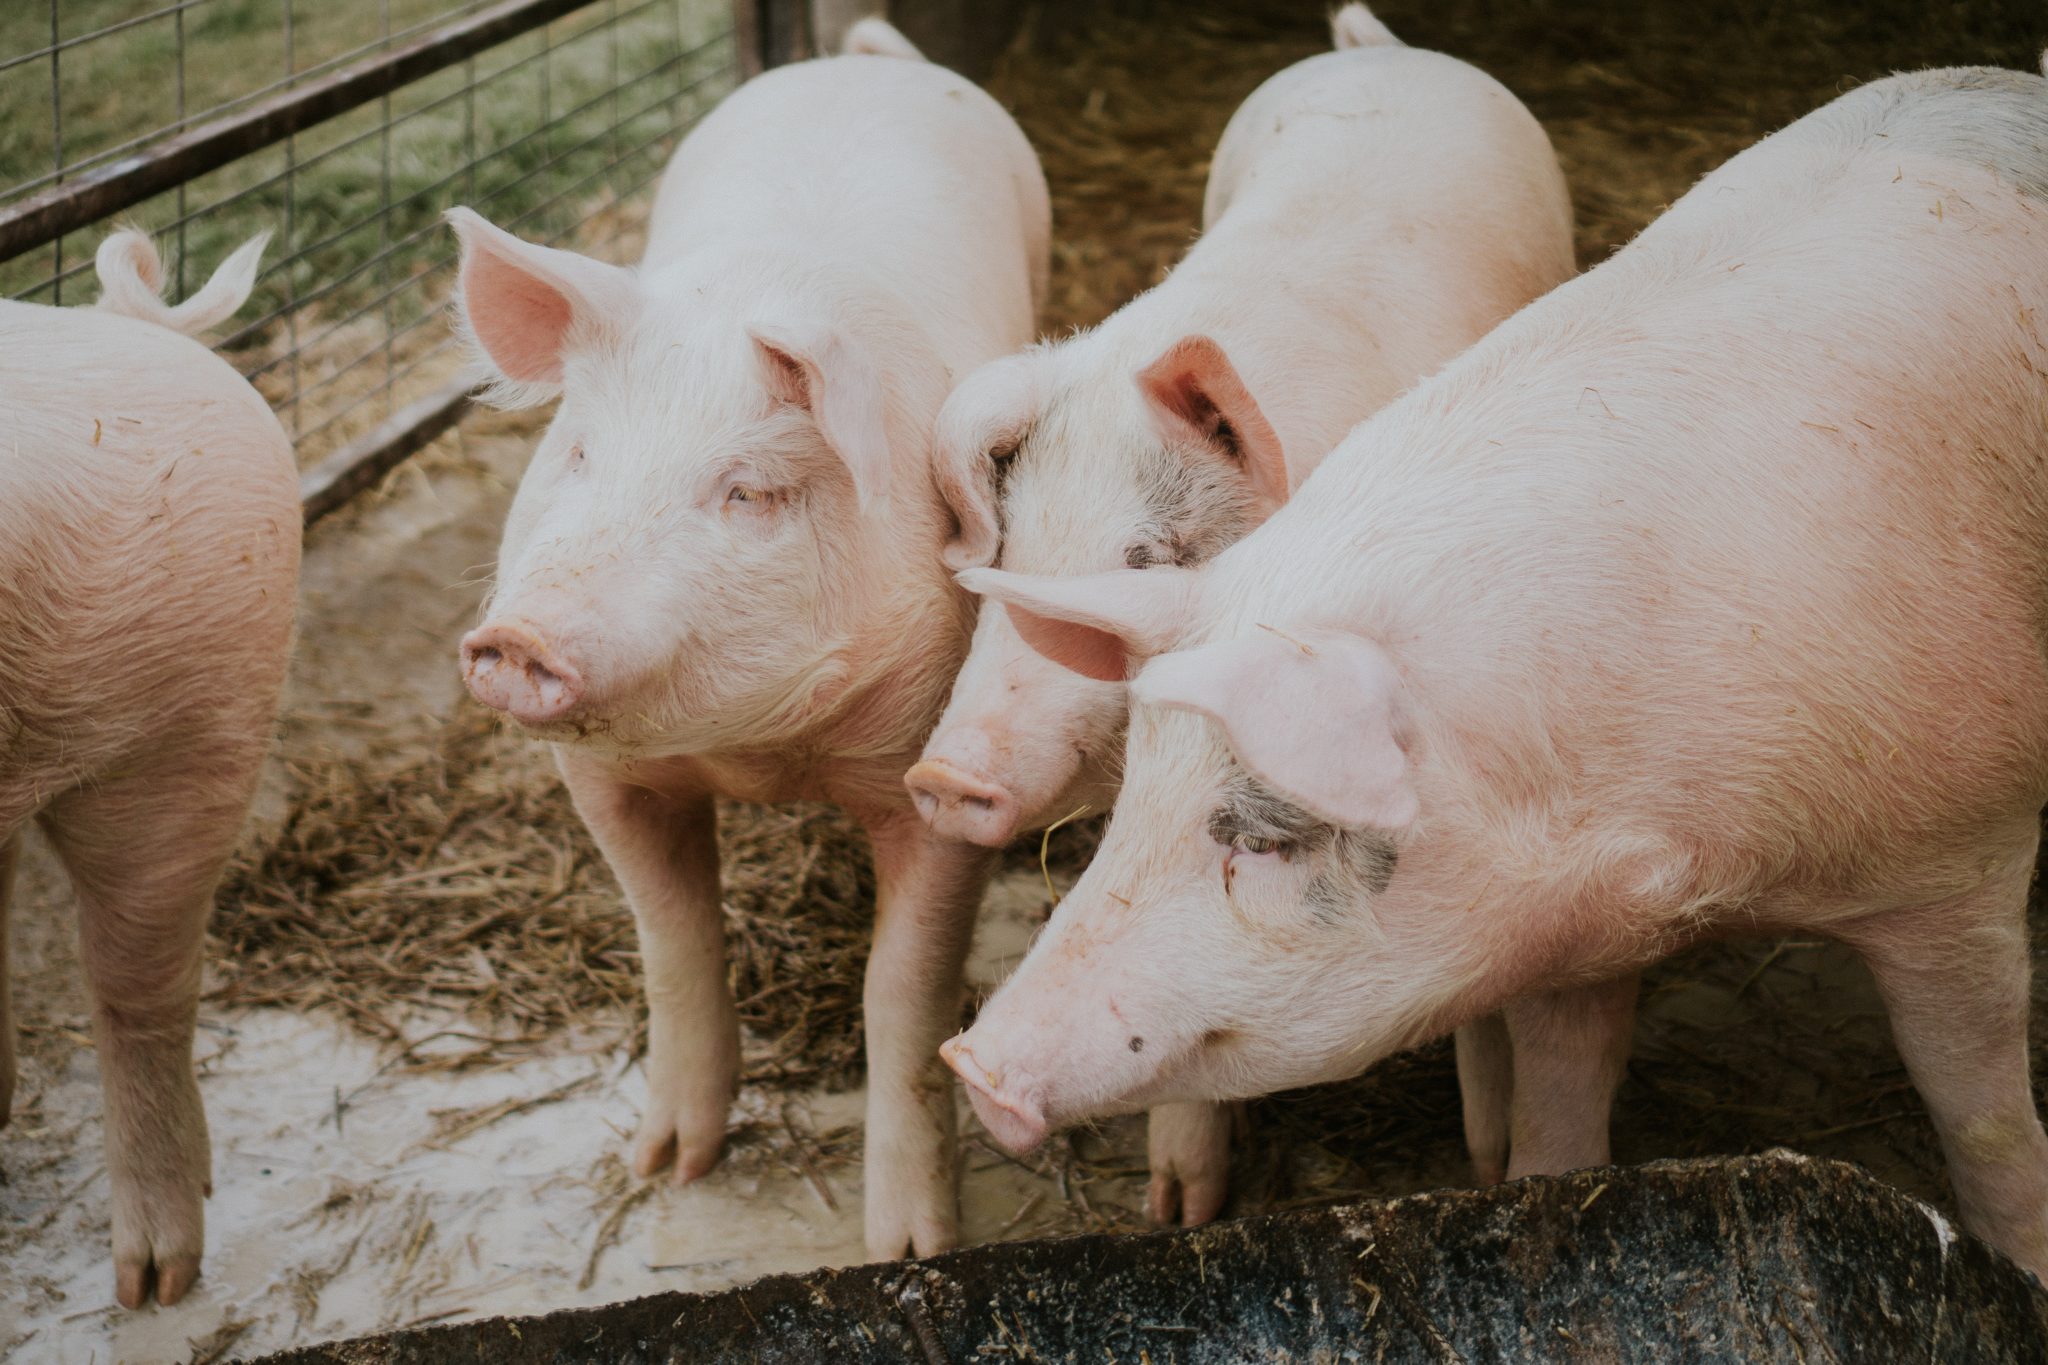 The Department of Agriculture is pushing to stop the importation of pork from areas affected by African swine fever